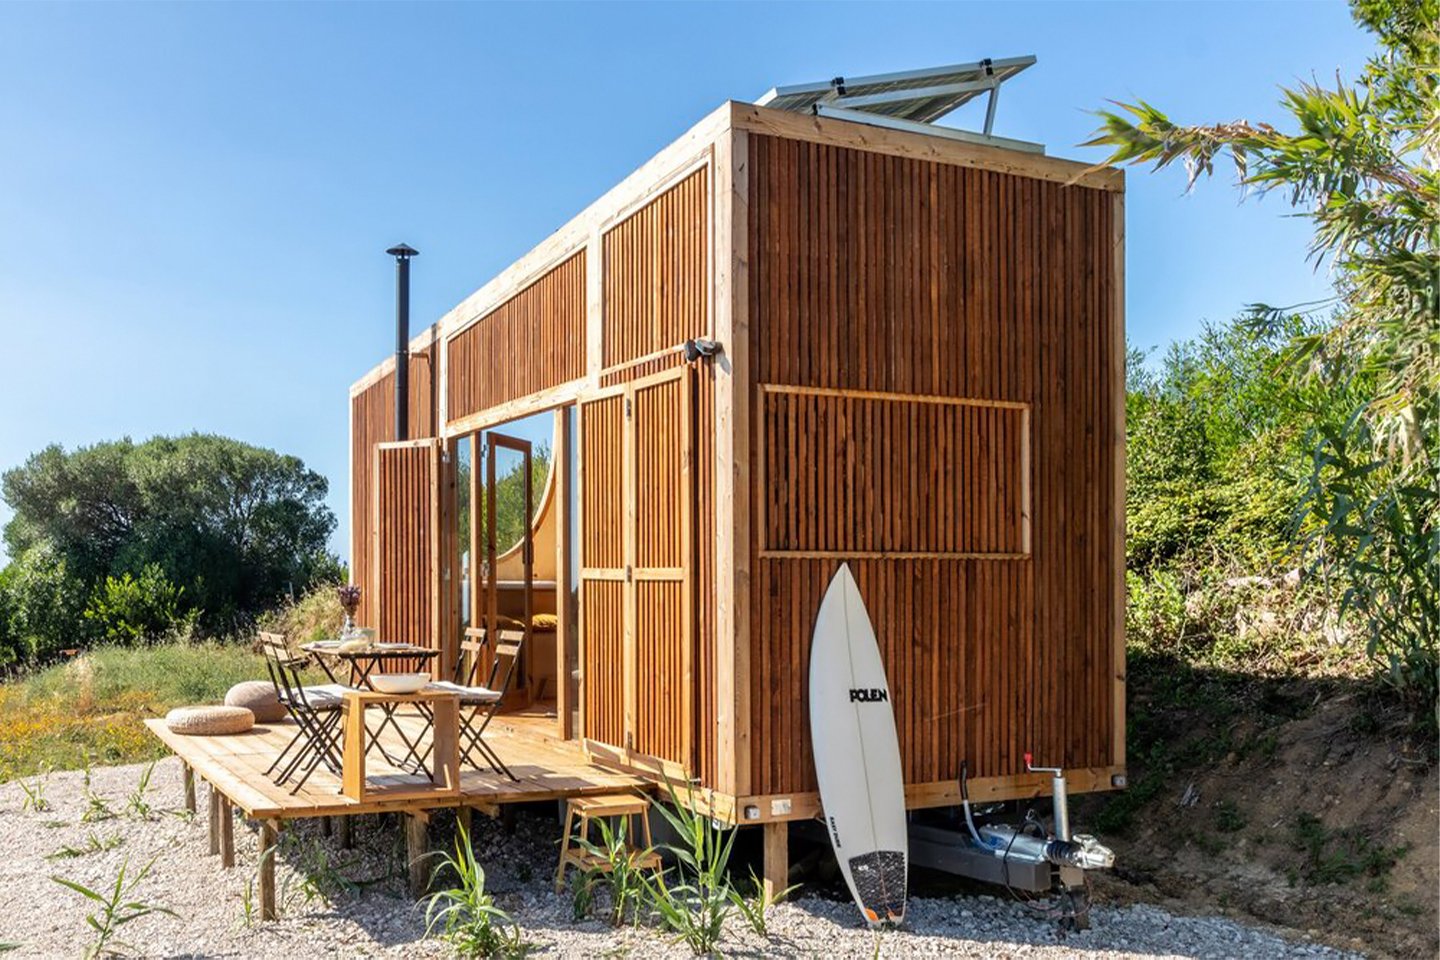 The Magic of Tiny House Design: Incredible Structures, Sustainable